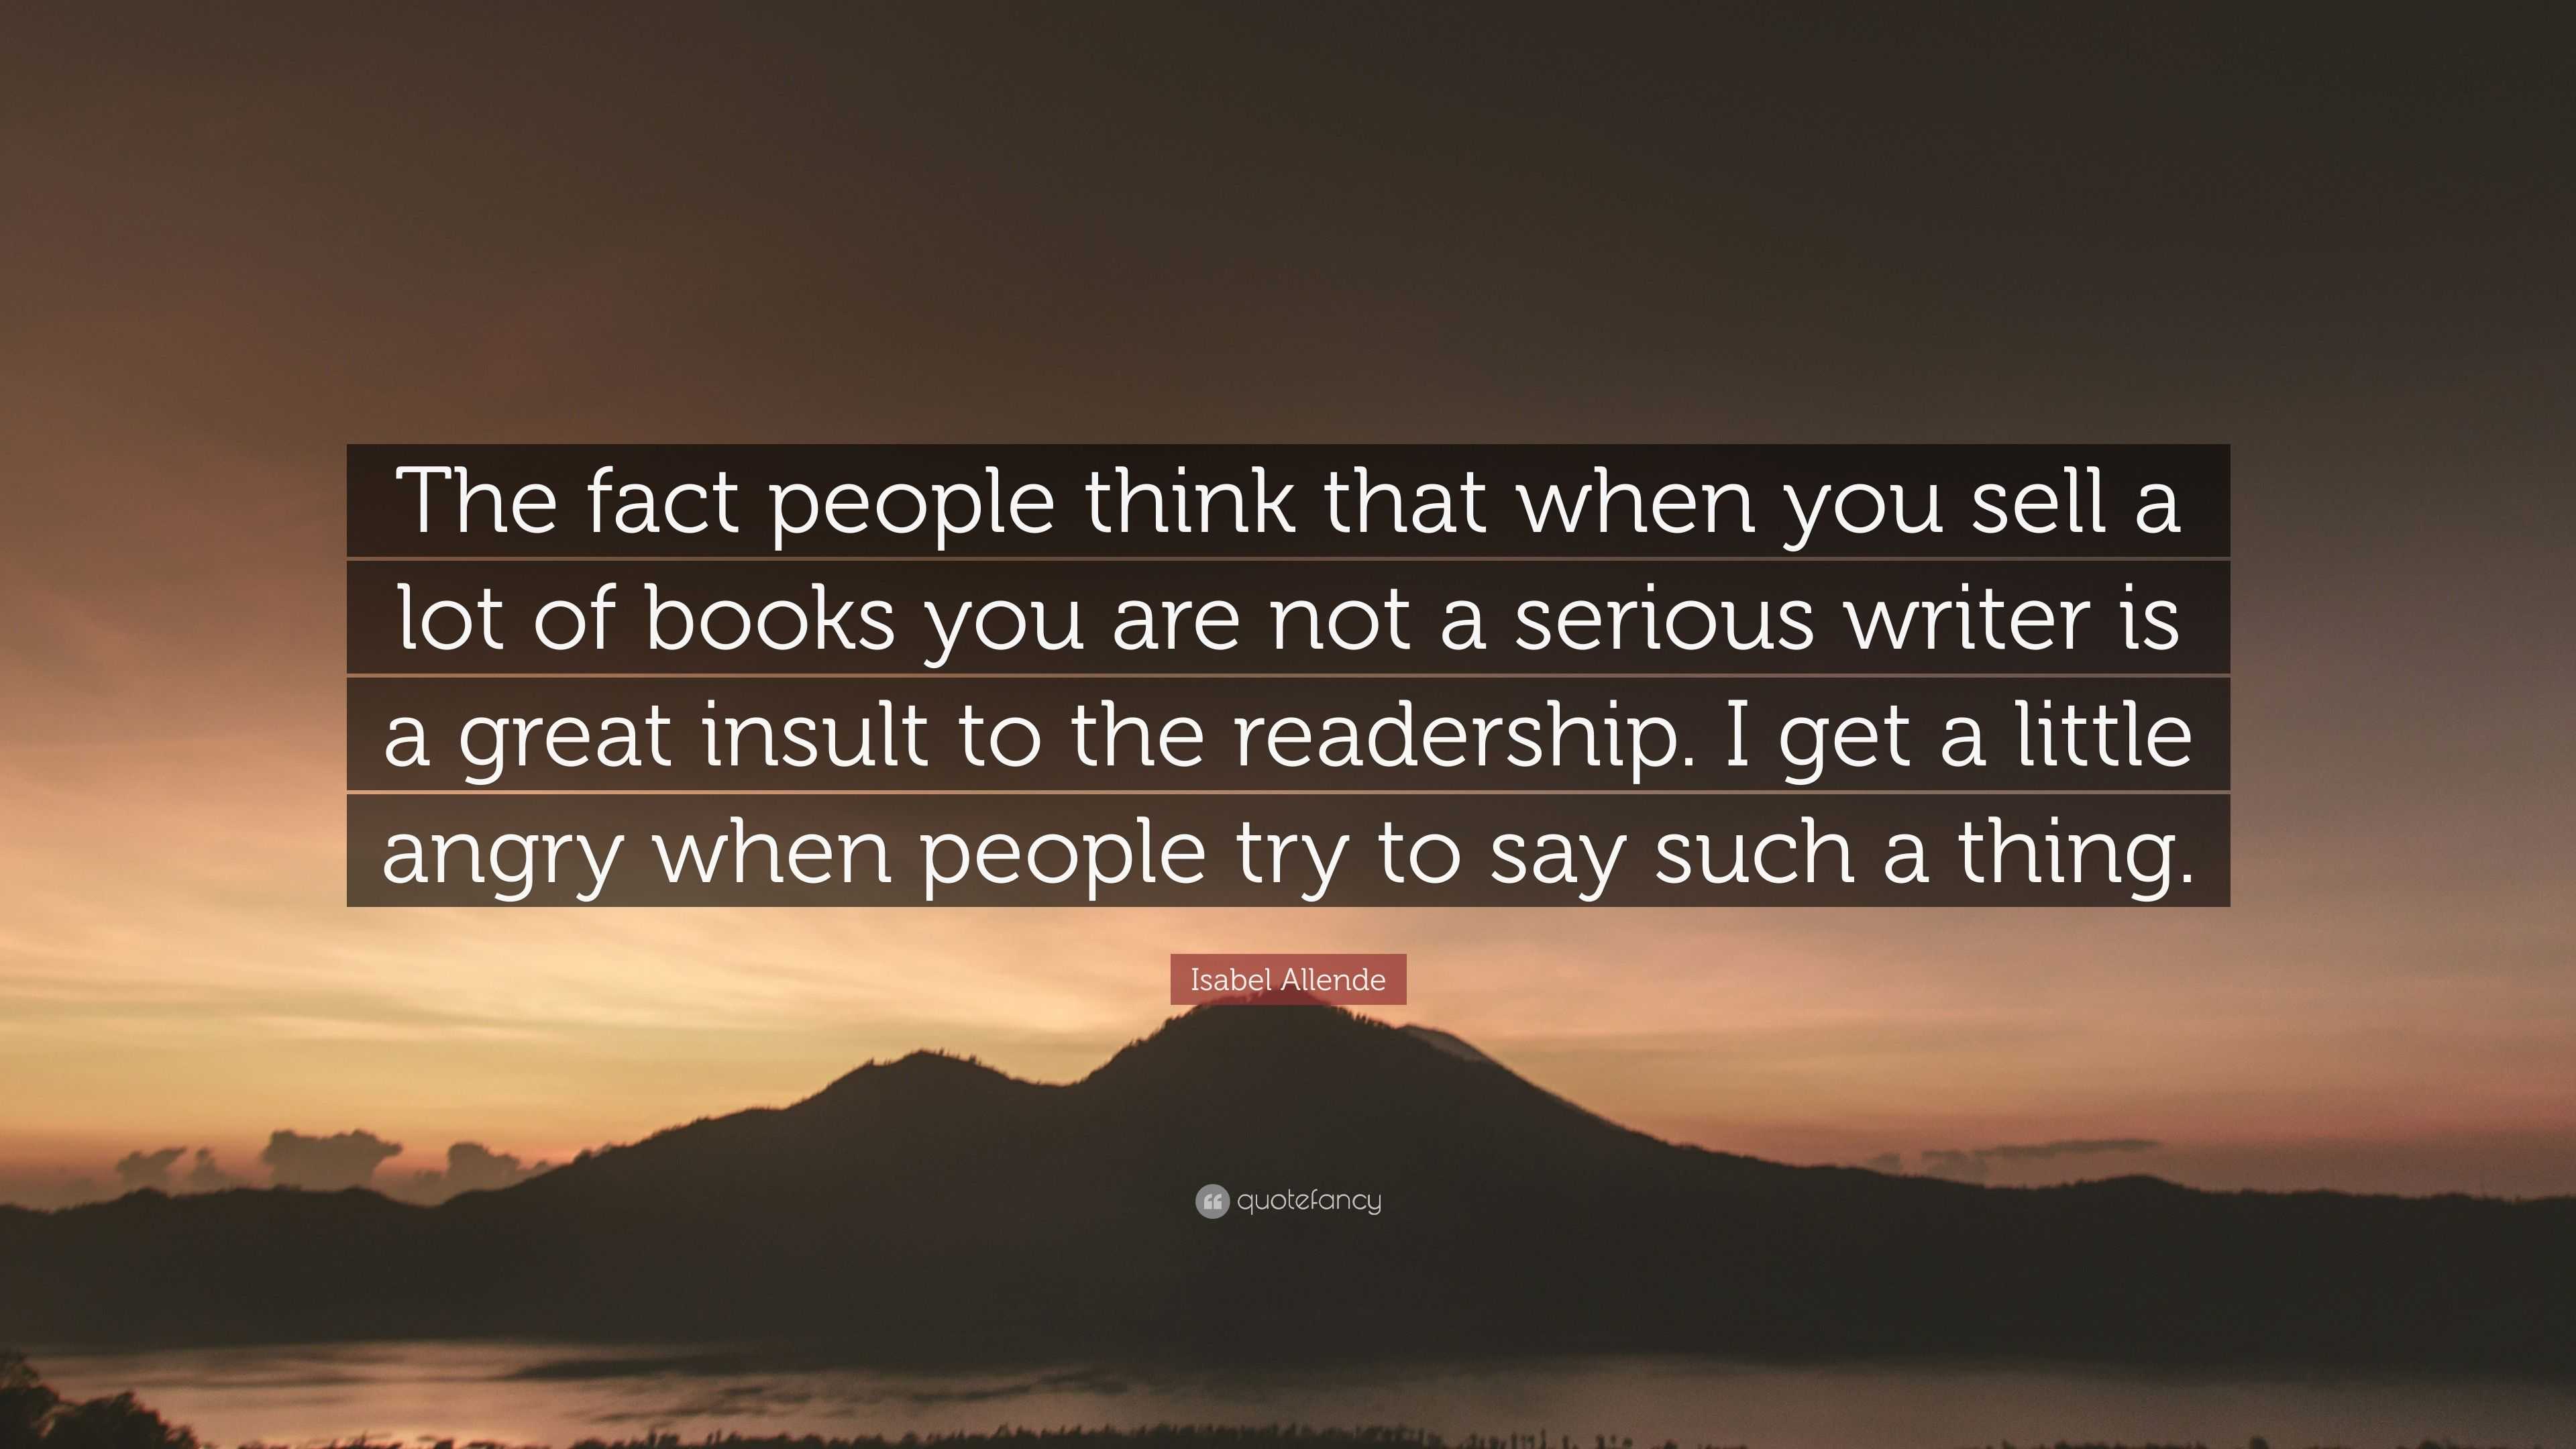 https://quotefancy.com/media/wallpaper/3840x2160/2477934-Isabel-Allende-Quote-The-fact-people-think-that-when-you-sell-a.jpg